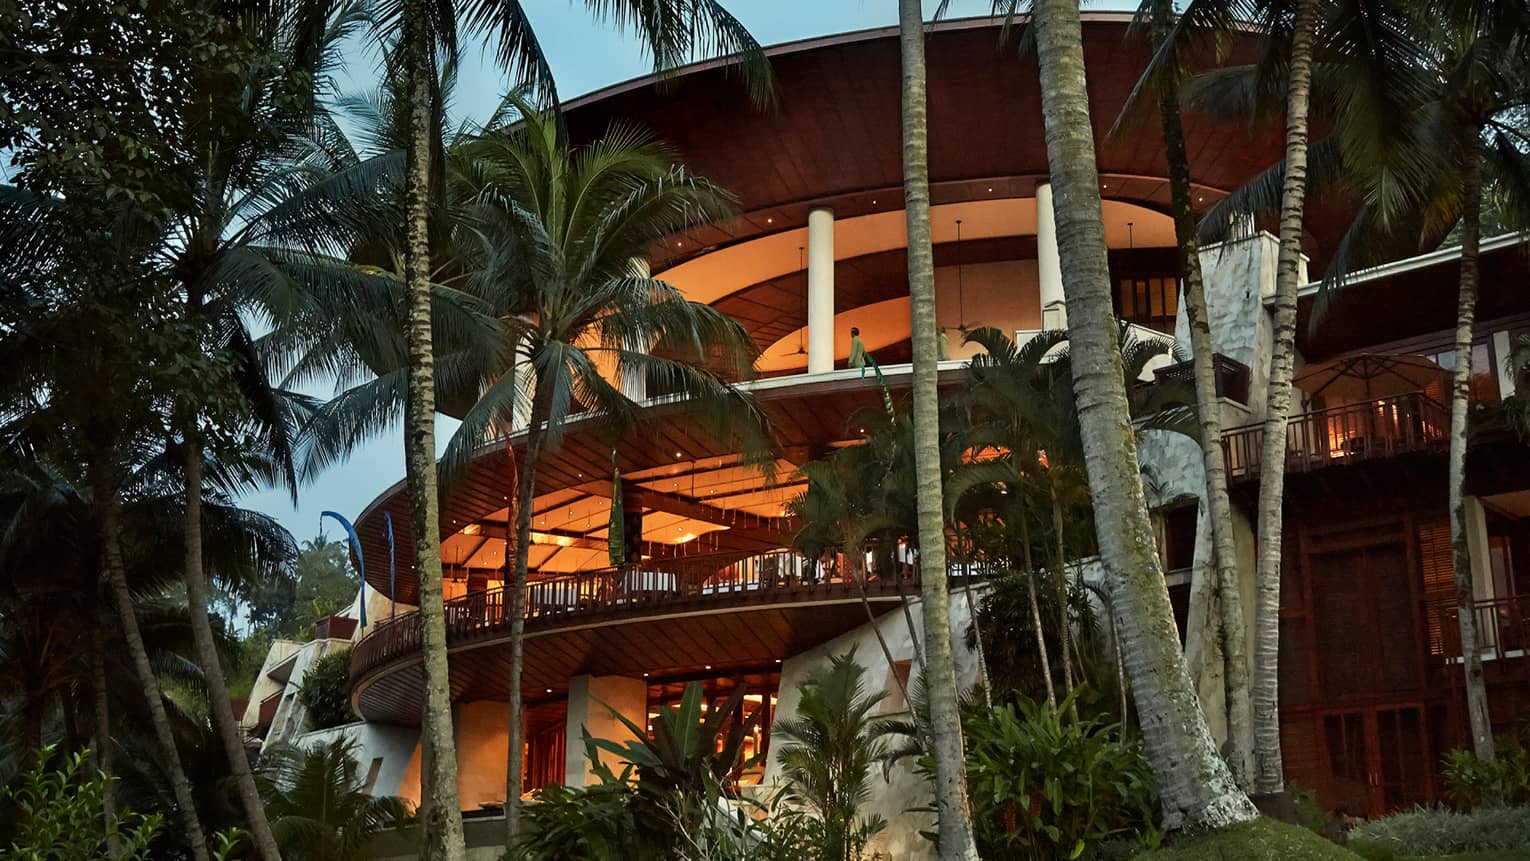 Four-storey curved balconies around resort building at dusk, lit with orange lights, surrounded by palms